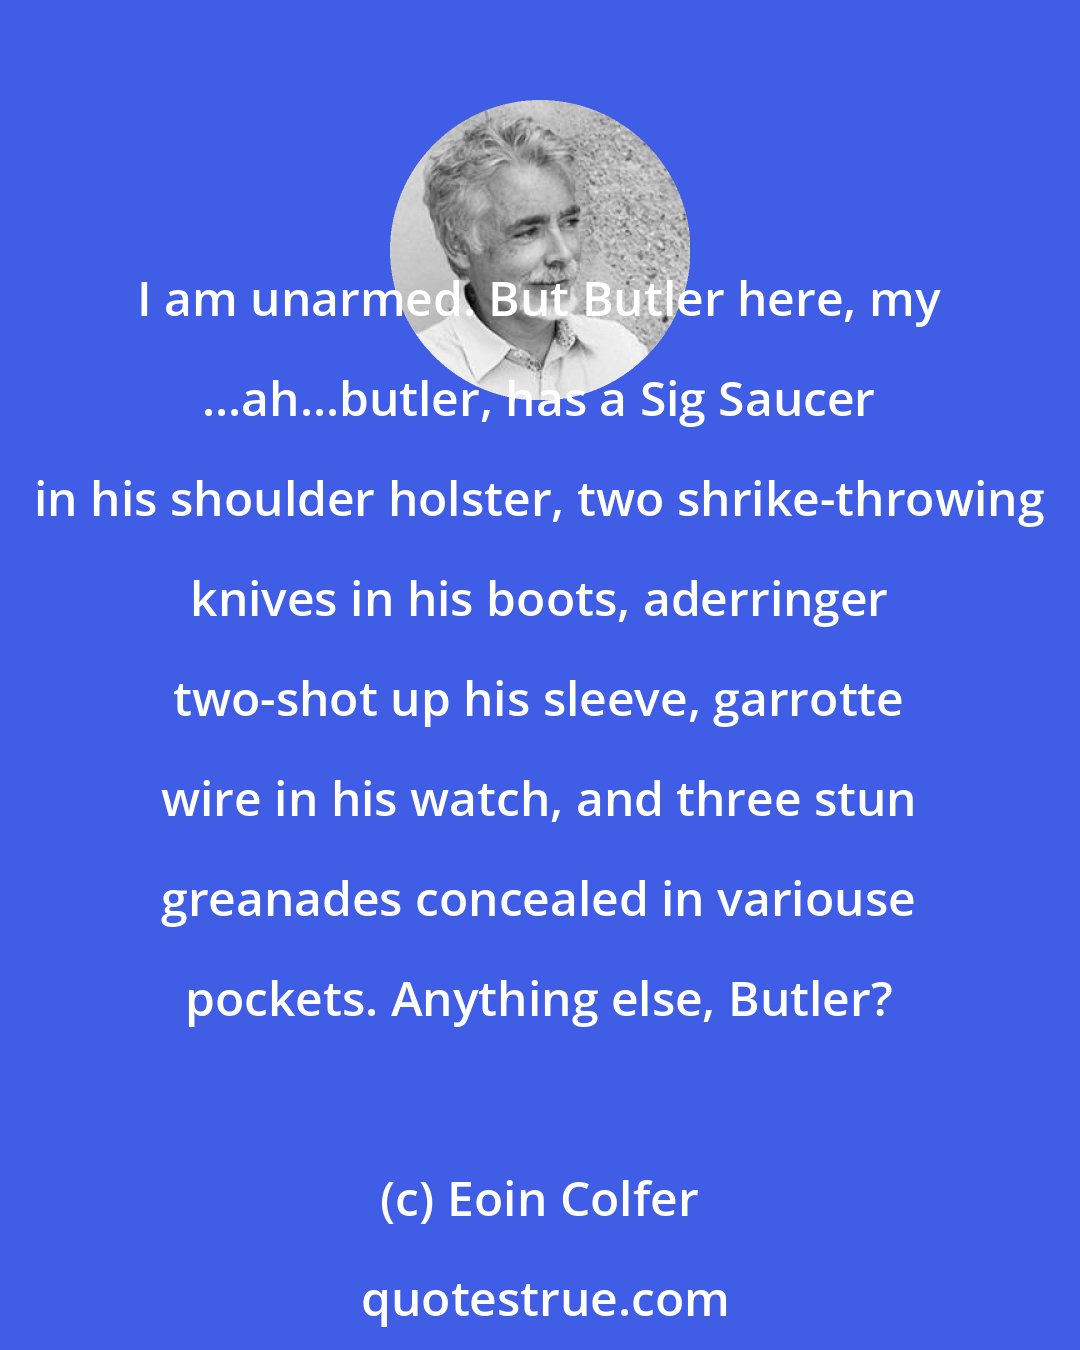 Eoin Colfer: I am unarmed. But Butler here, my ...ah...butler, has a Sig Saucer in his shoulder holster, two shrike-throwing knives in his boots, aderringer two-shot up his sleeve, garrotte wire in his watch, and three stun greanades concealed in variouse pockets. Anything else, Butler?